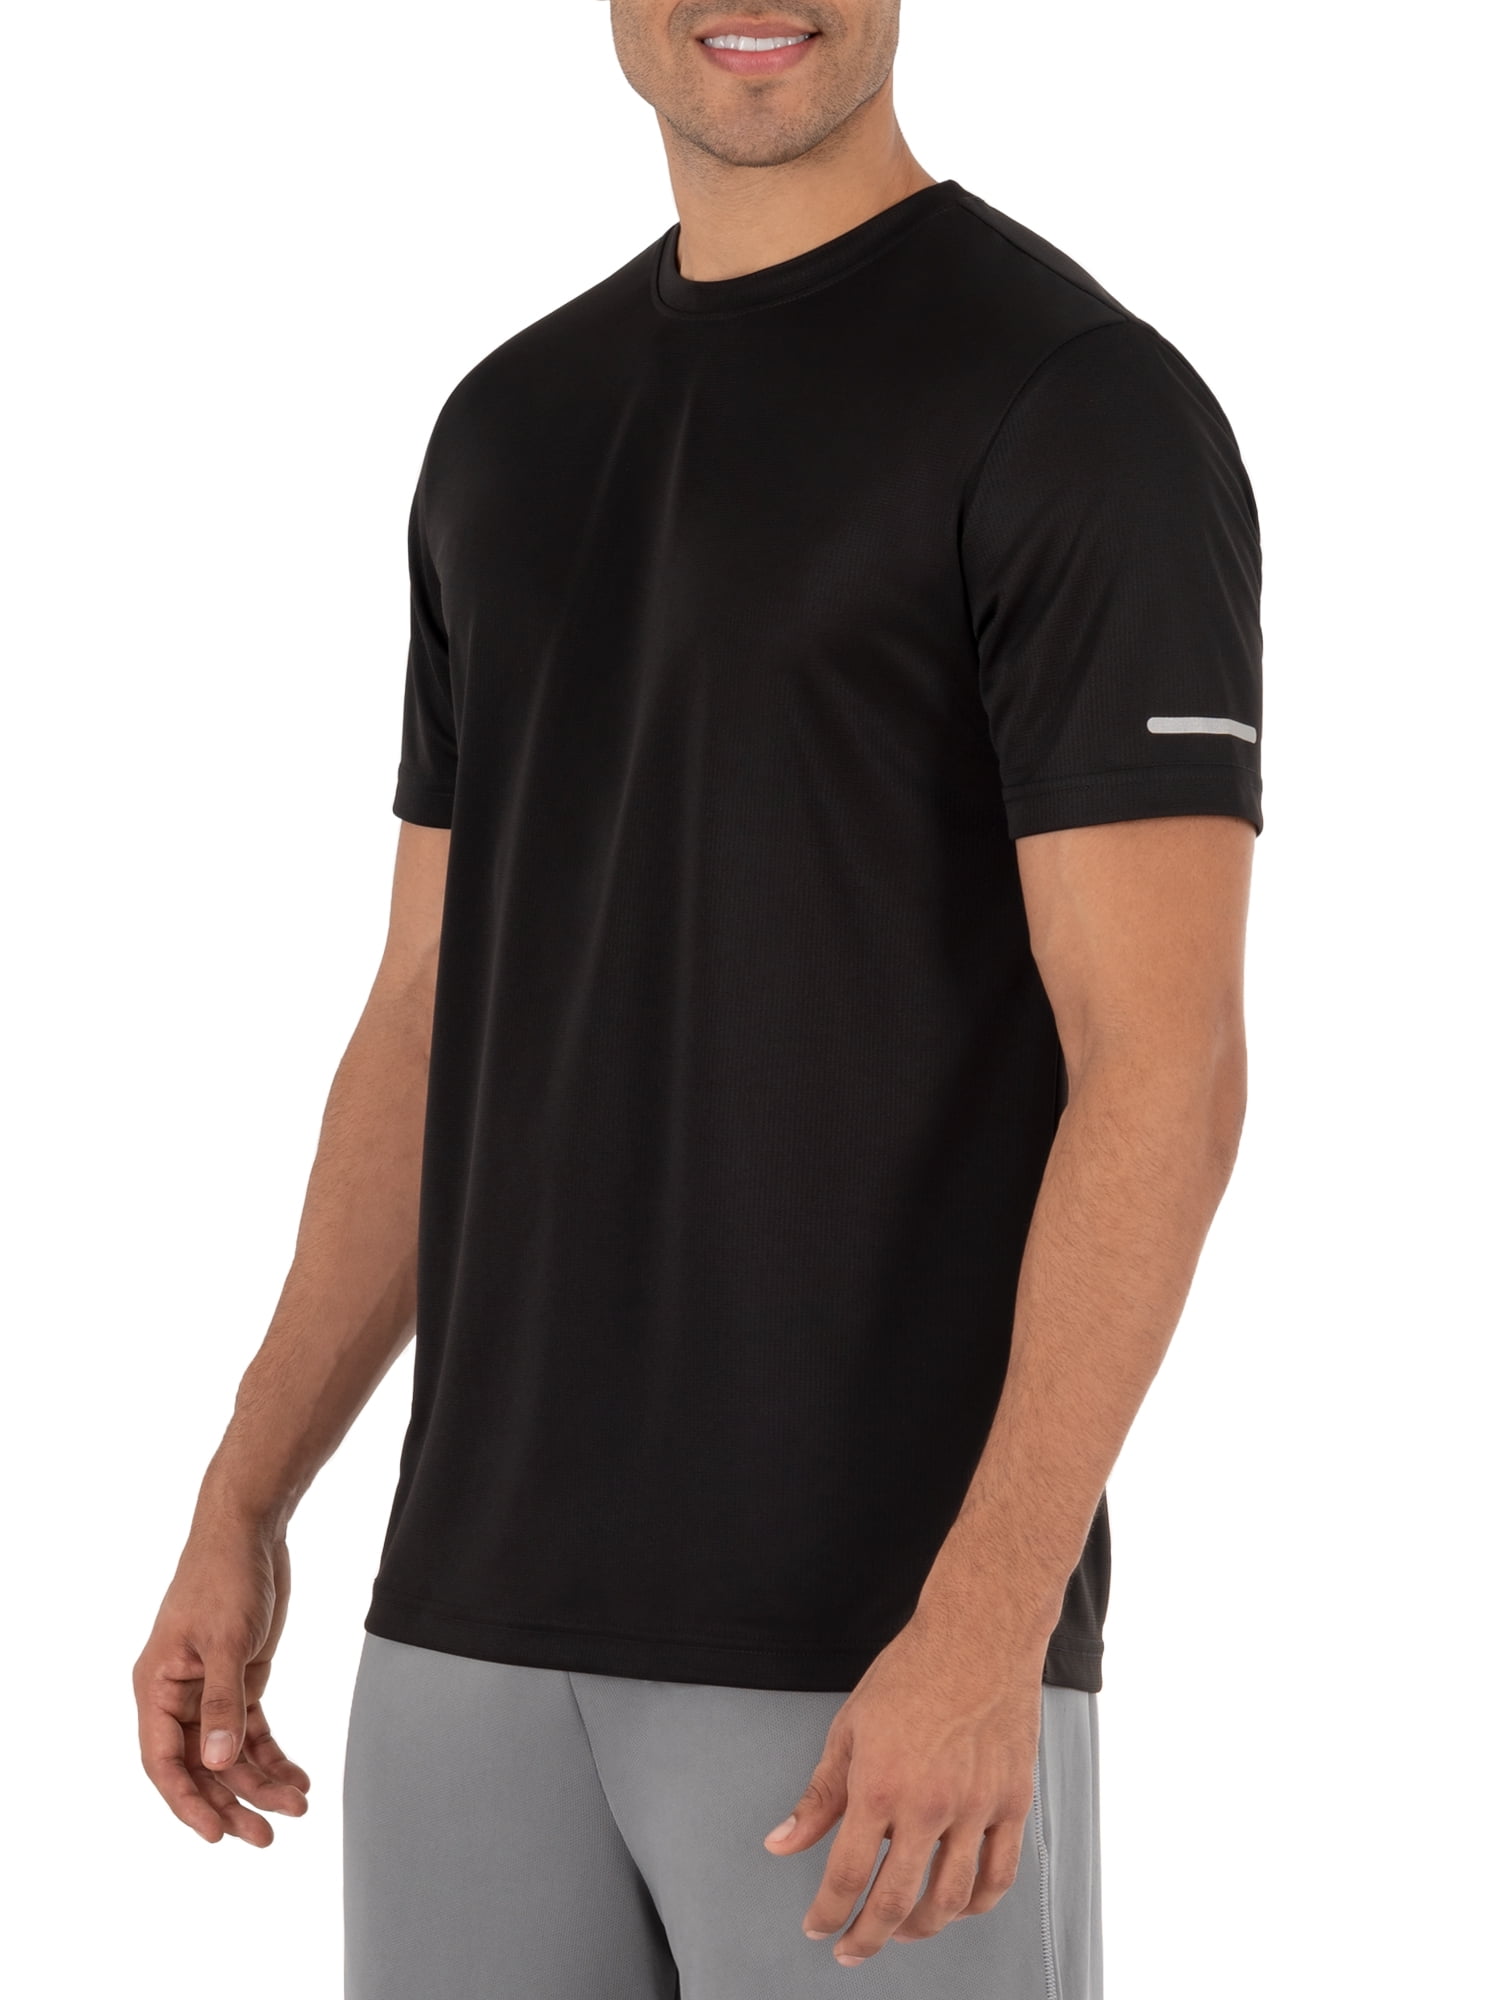 Crew Athletic Sleeve Core T-Shirt, Works 2 Short Dry Men\'s Pack Quick Performance